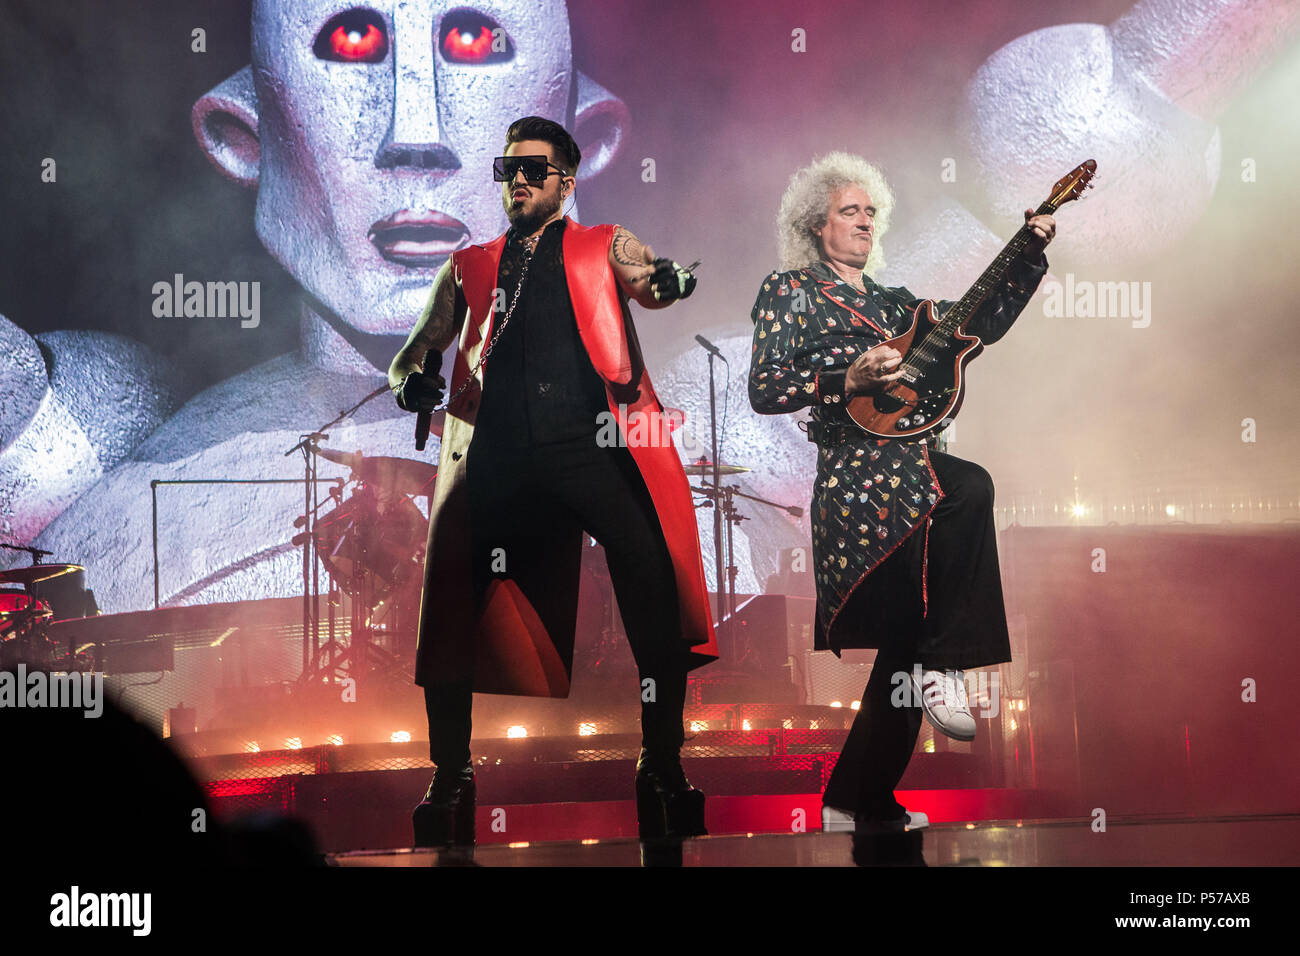 Milan Italy. 25 June 2018. The British rock band QUEEN with Adam Lambert  performs live on